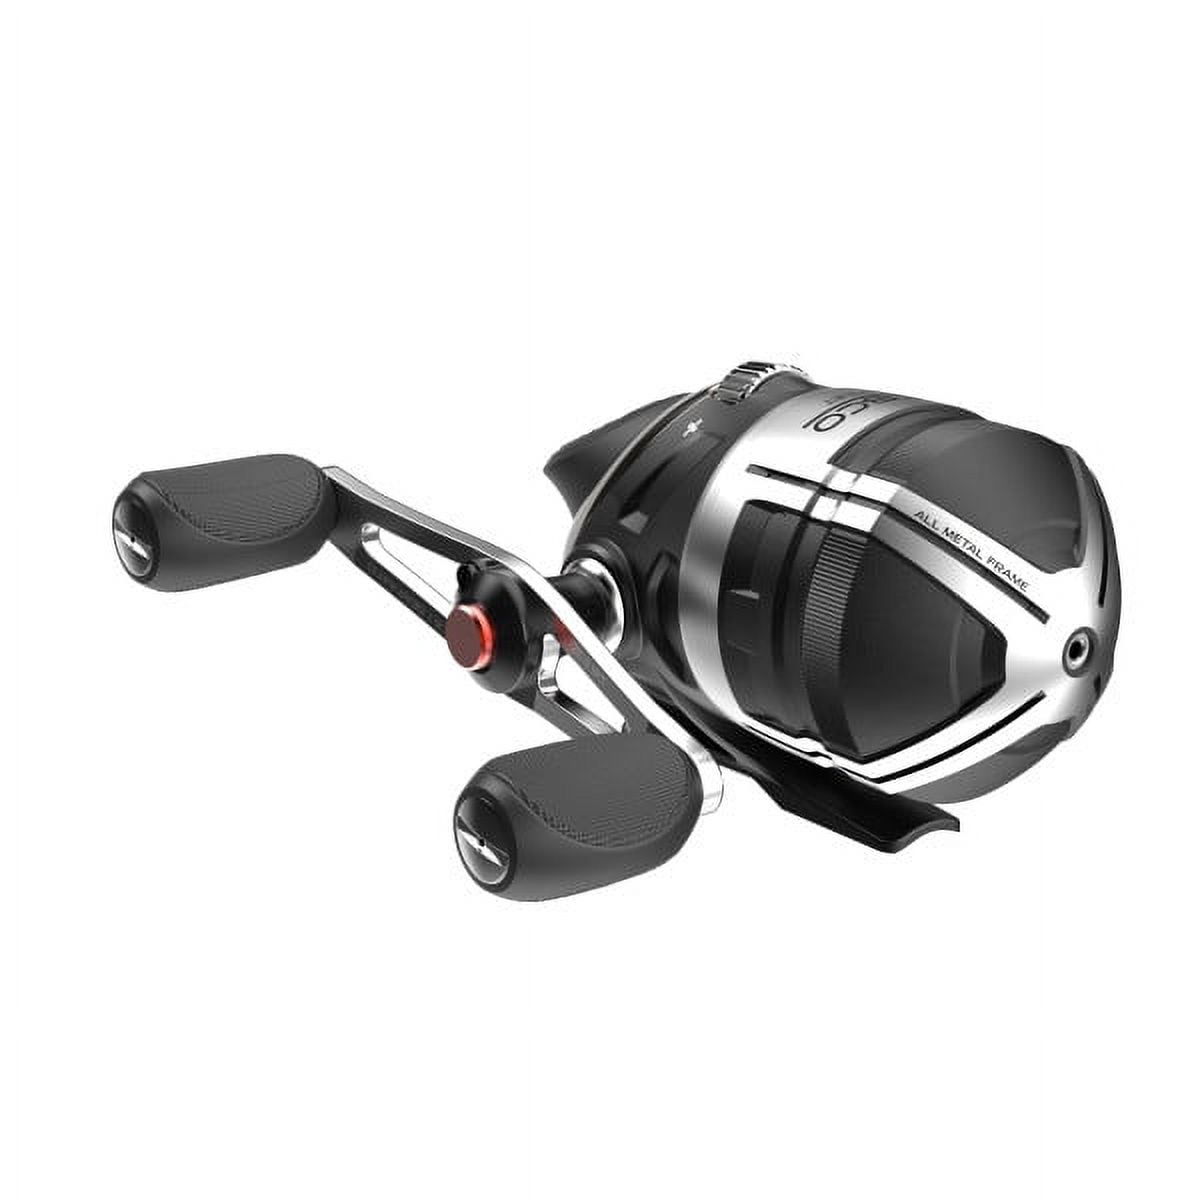 Zebco Bullet Spincast Fishing Reel, Size 20 Reel, Fast 28.9 Inches